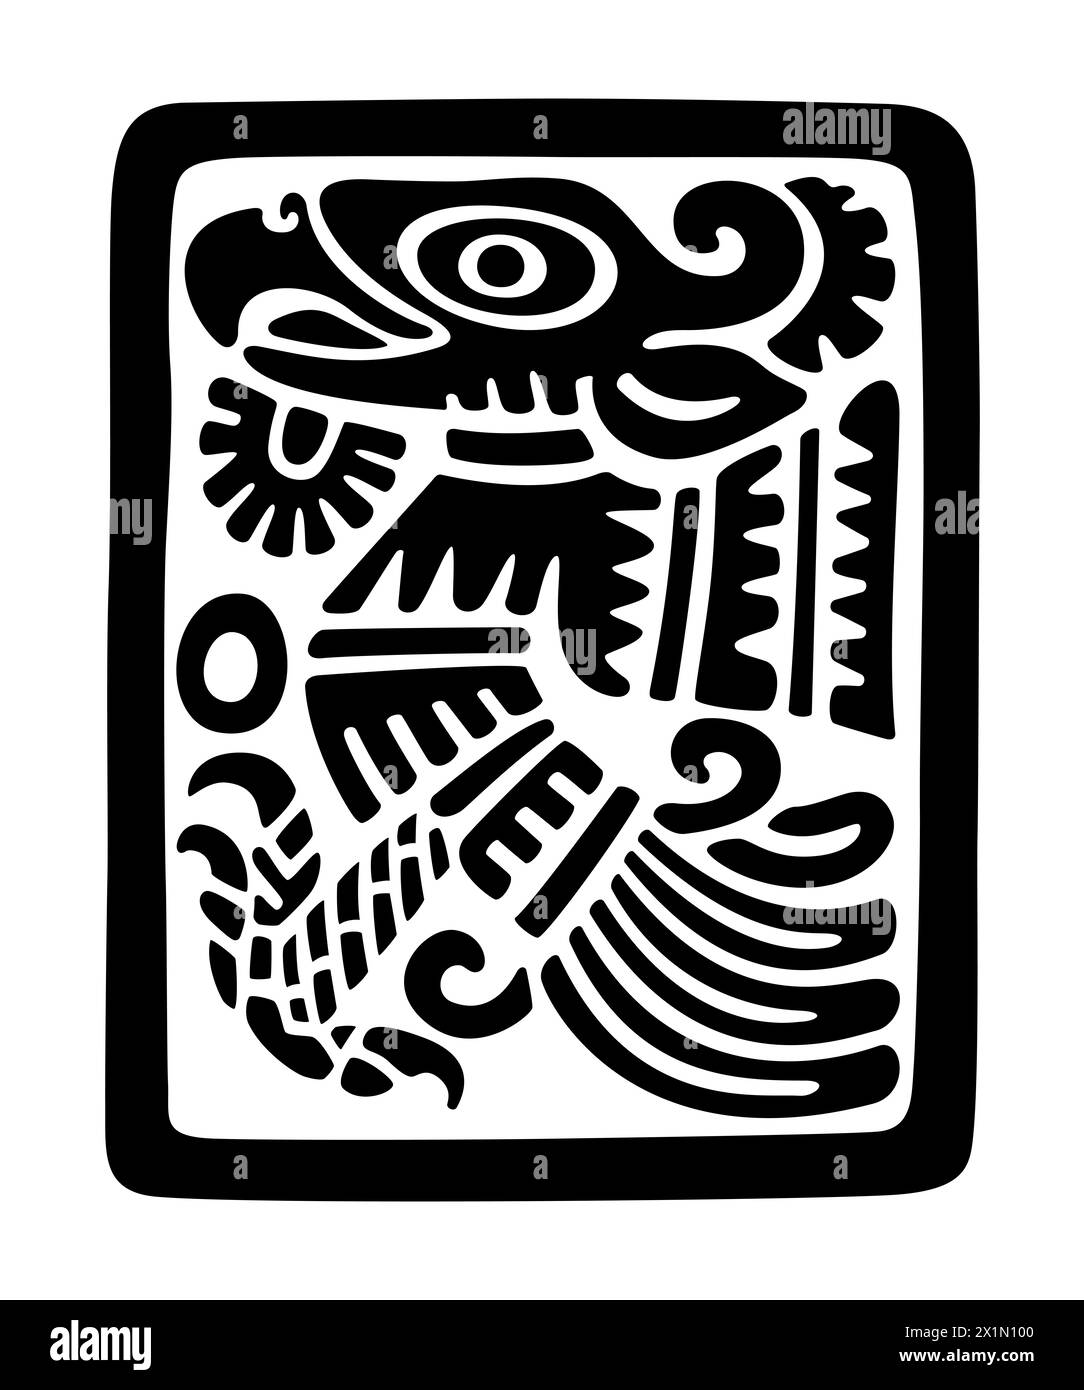 Cuauhtli, symbol for the golden eagle, and the fifteenth day sign of the Aztec calendar. Flat clay stamp motif of ancient Mexico. Stock Photo